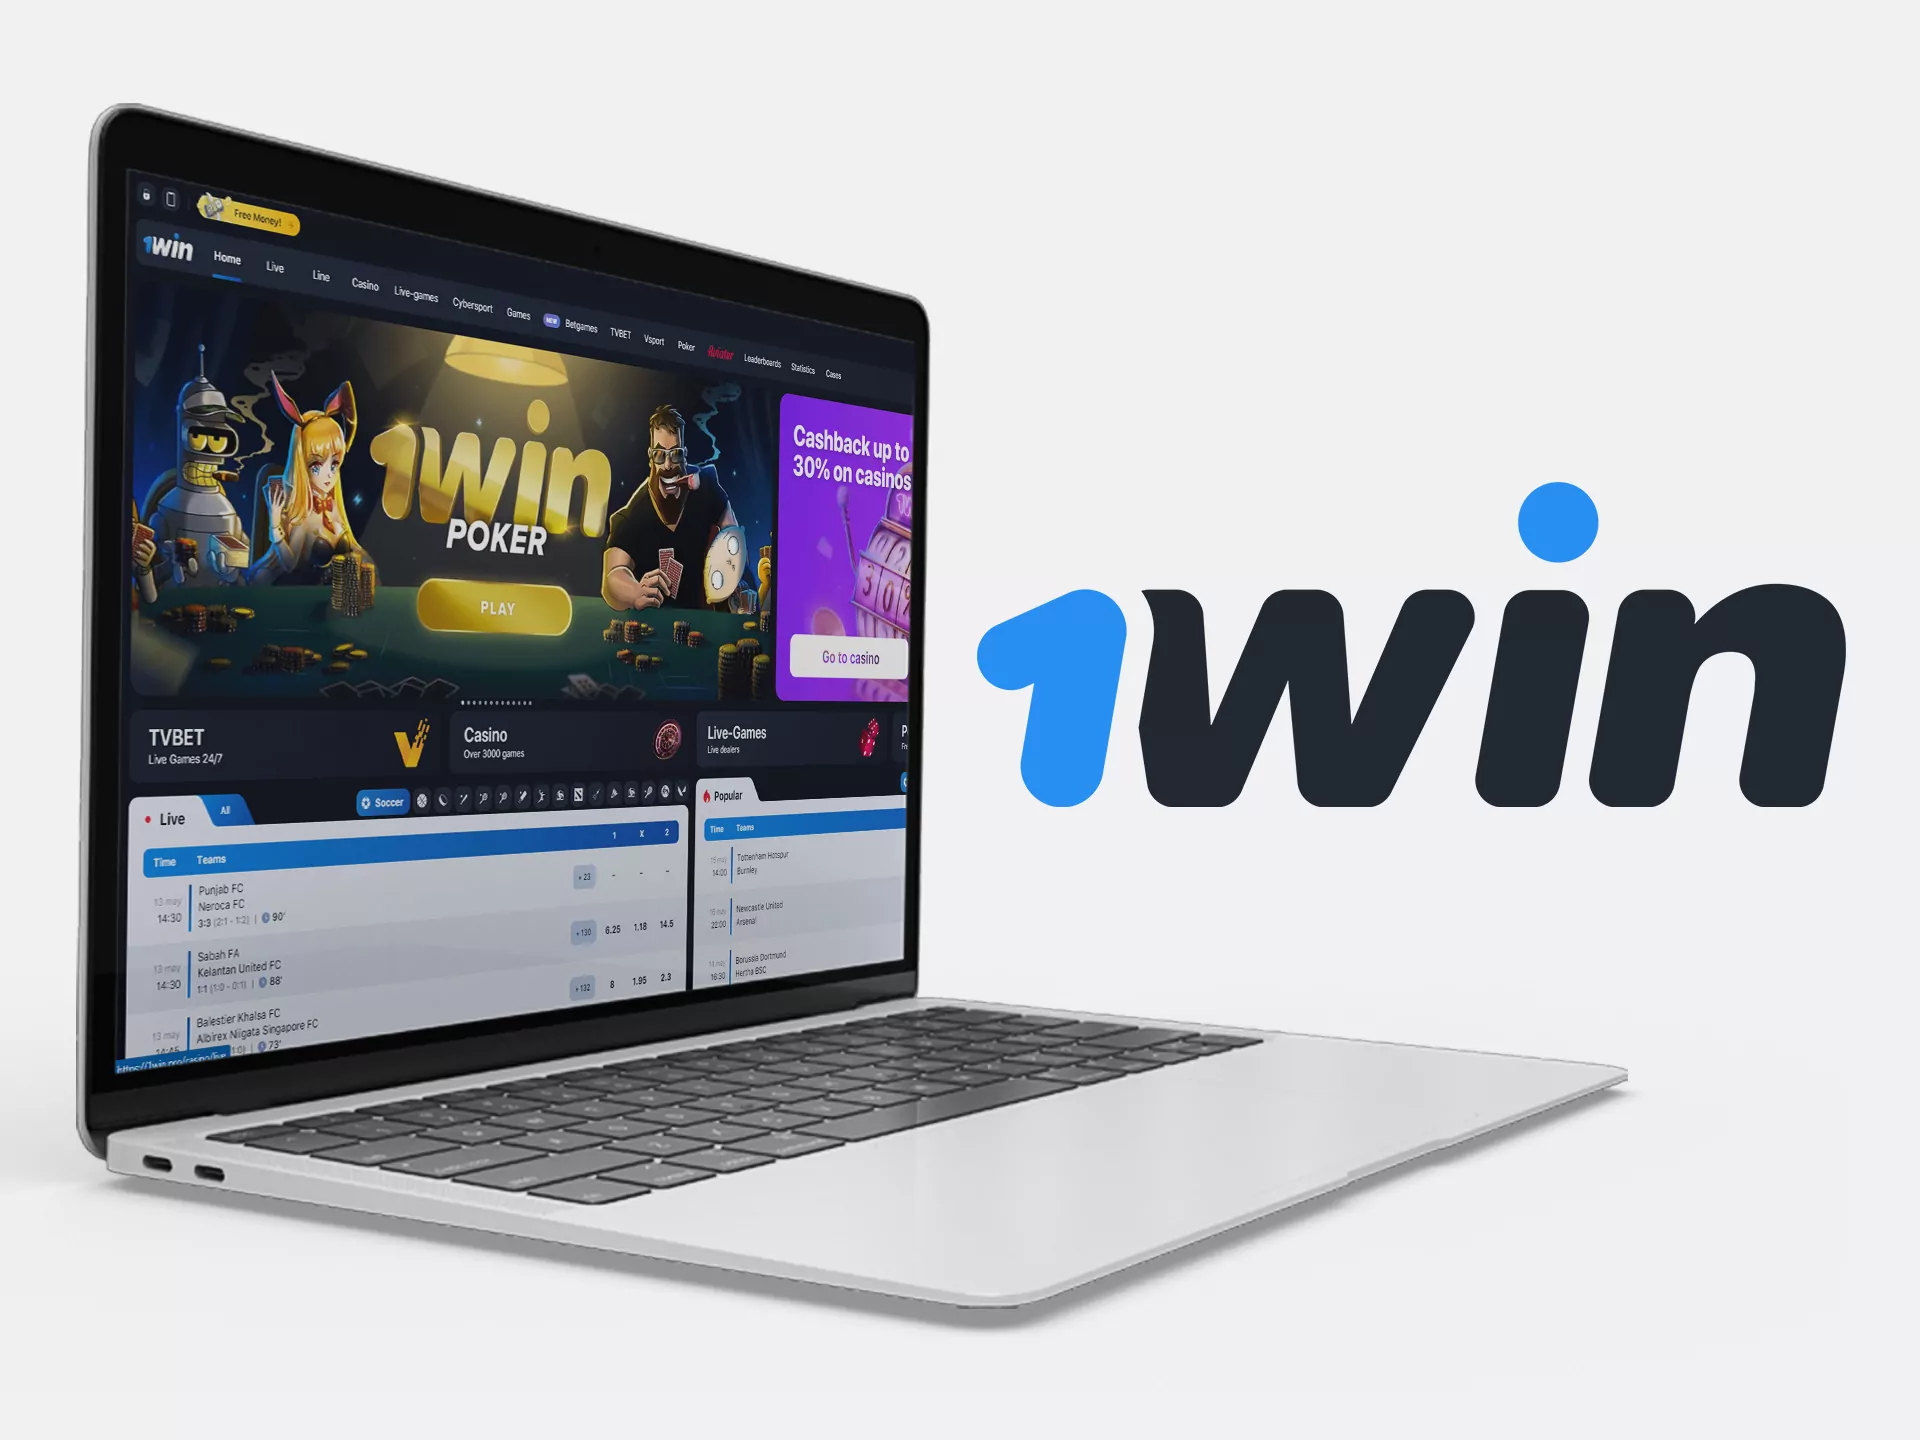 1win betting site is a huge modern brand for sports bettong and online entertainment.